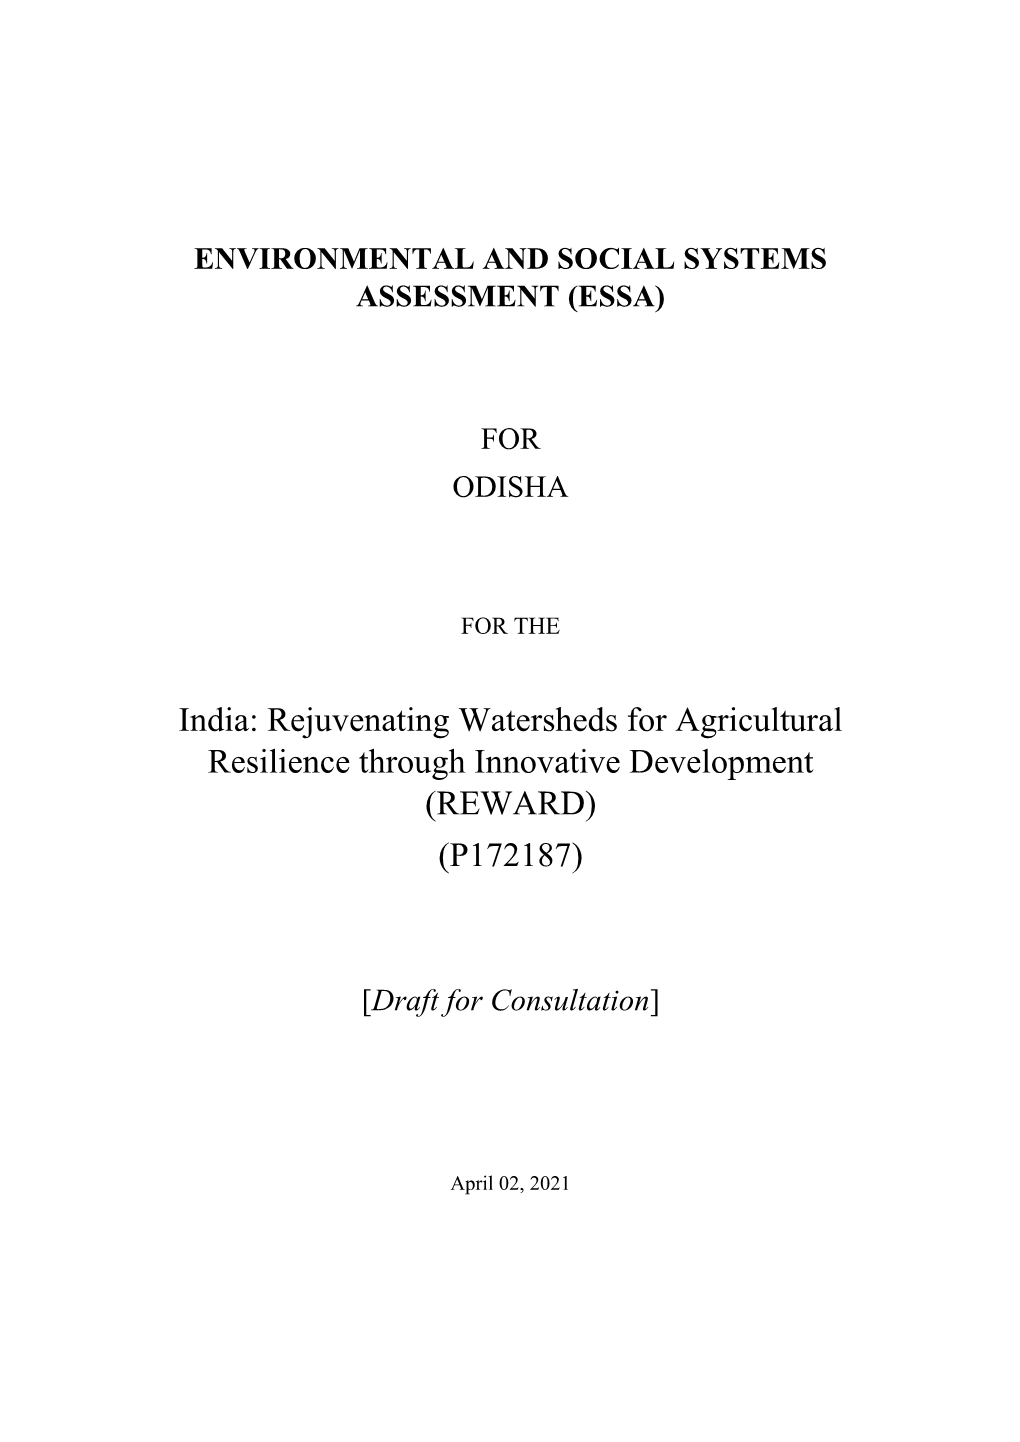 India: Rejuvenating Watersheds for Agricultural Resilience Through Innovative Development (REWARD) (P172187)